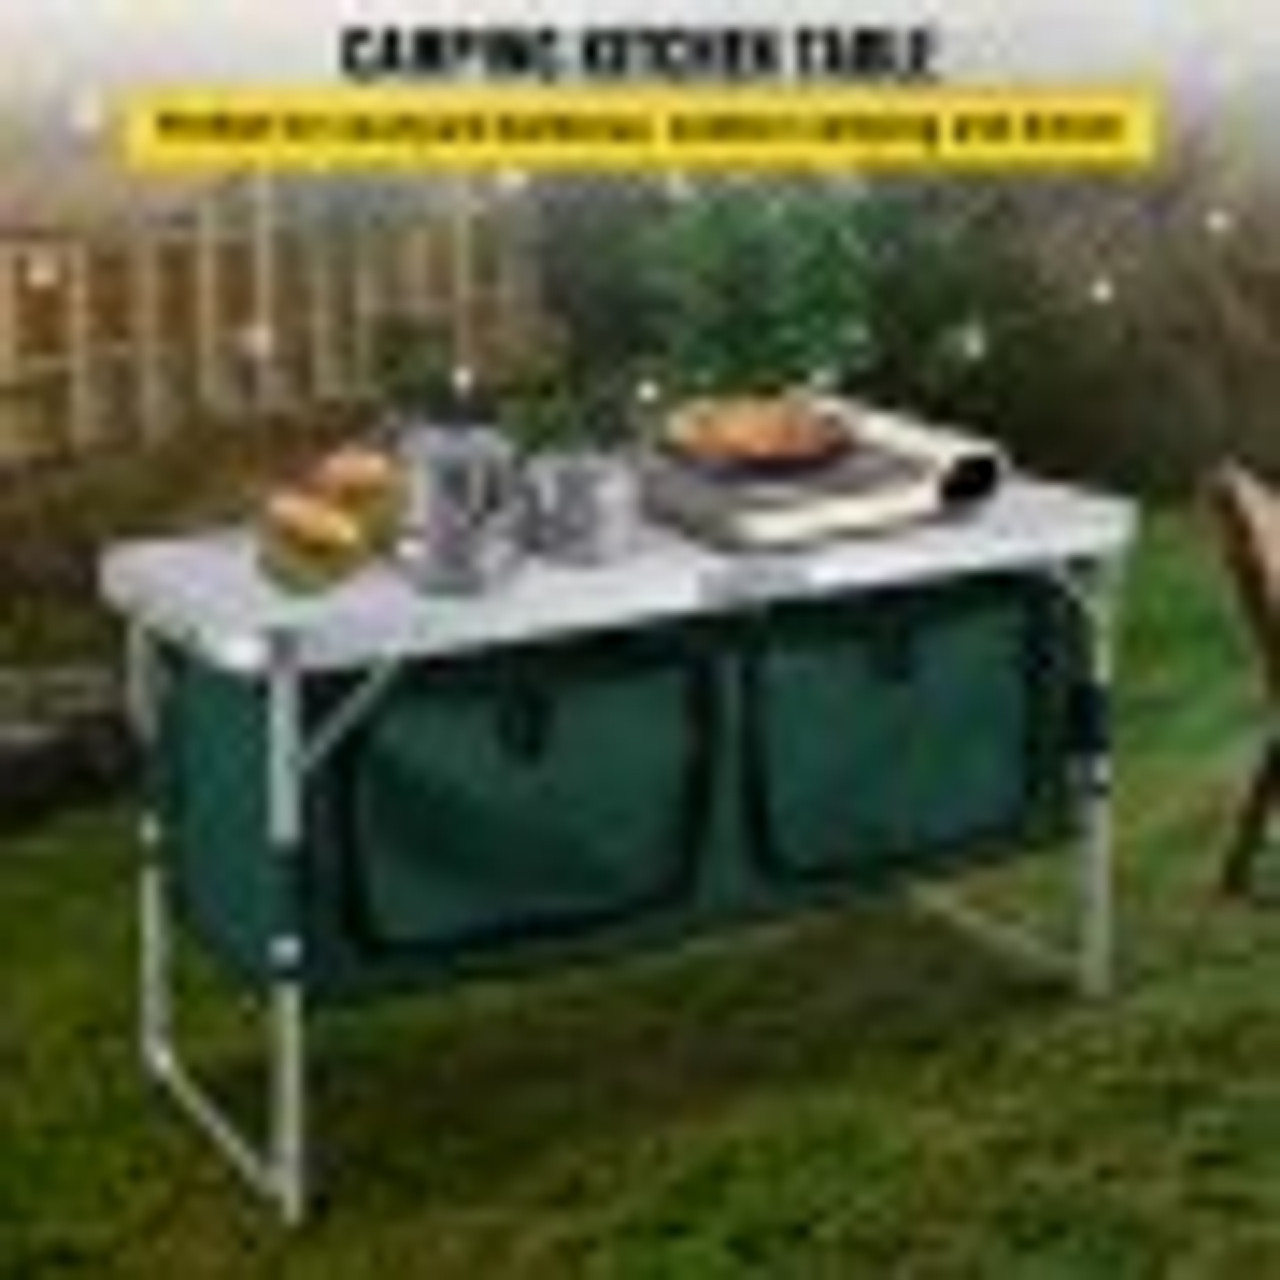 Aluminum Portable Folding Camp Station with Storage Organizer & 4 Adjustable Feet Quick Installation for Outdoor Picnic Beach Party Cooking, Green